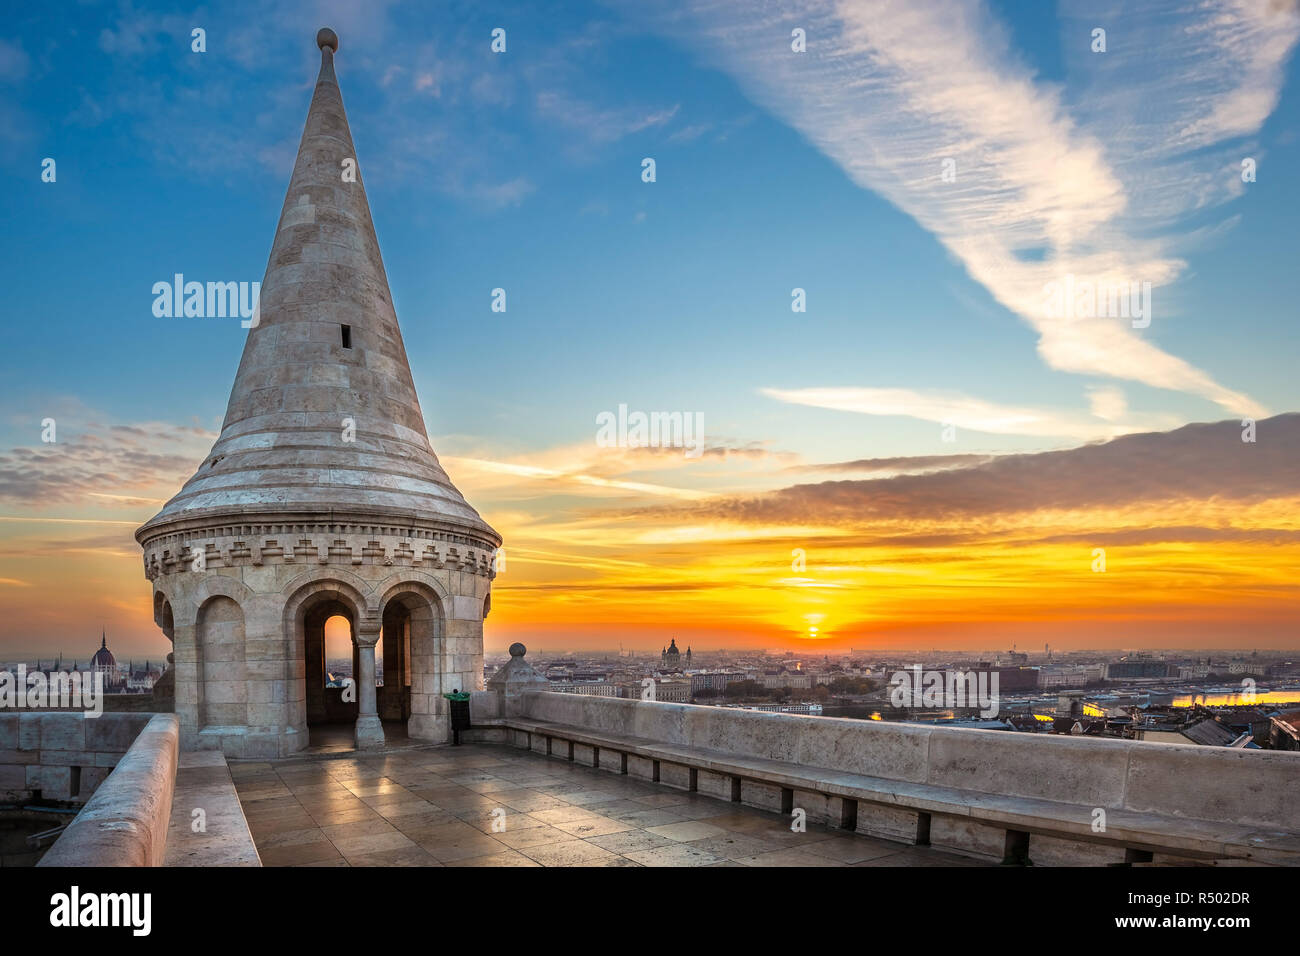 Budapest, Hungary - Beautiful sunrise at the Fisherman's Bastion with skyline view of Budapest including Parliament and St. Stephen's Basilica Stock Photo